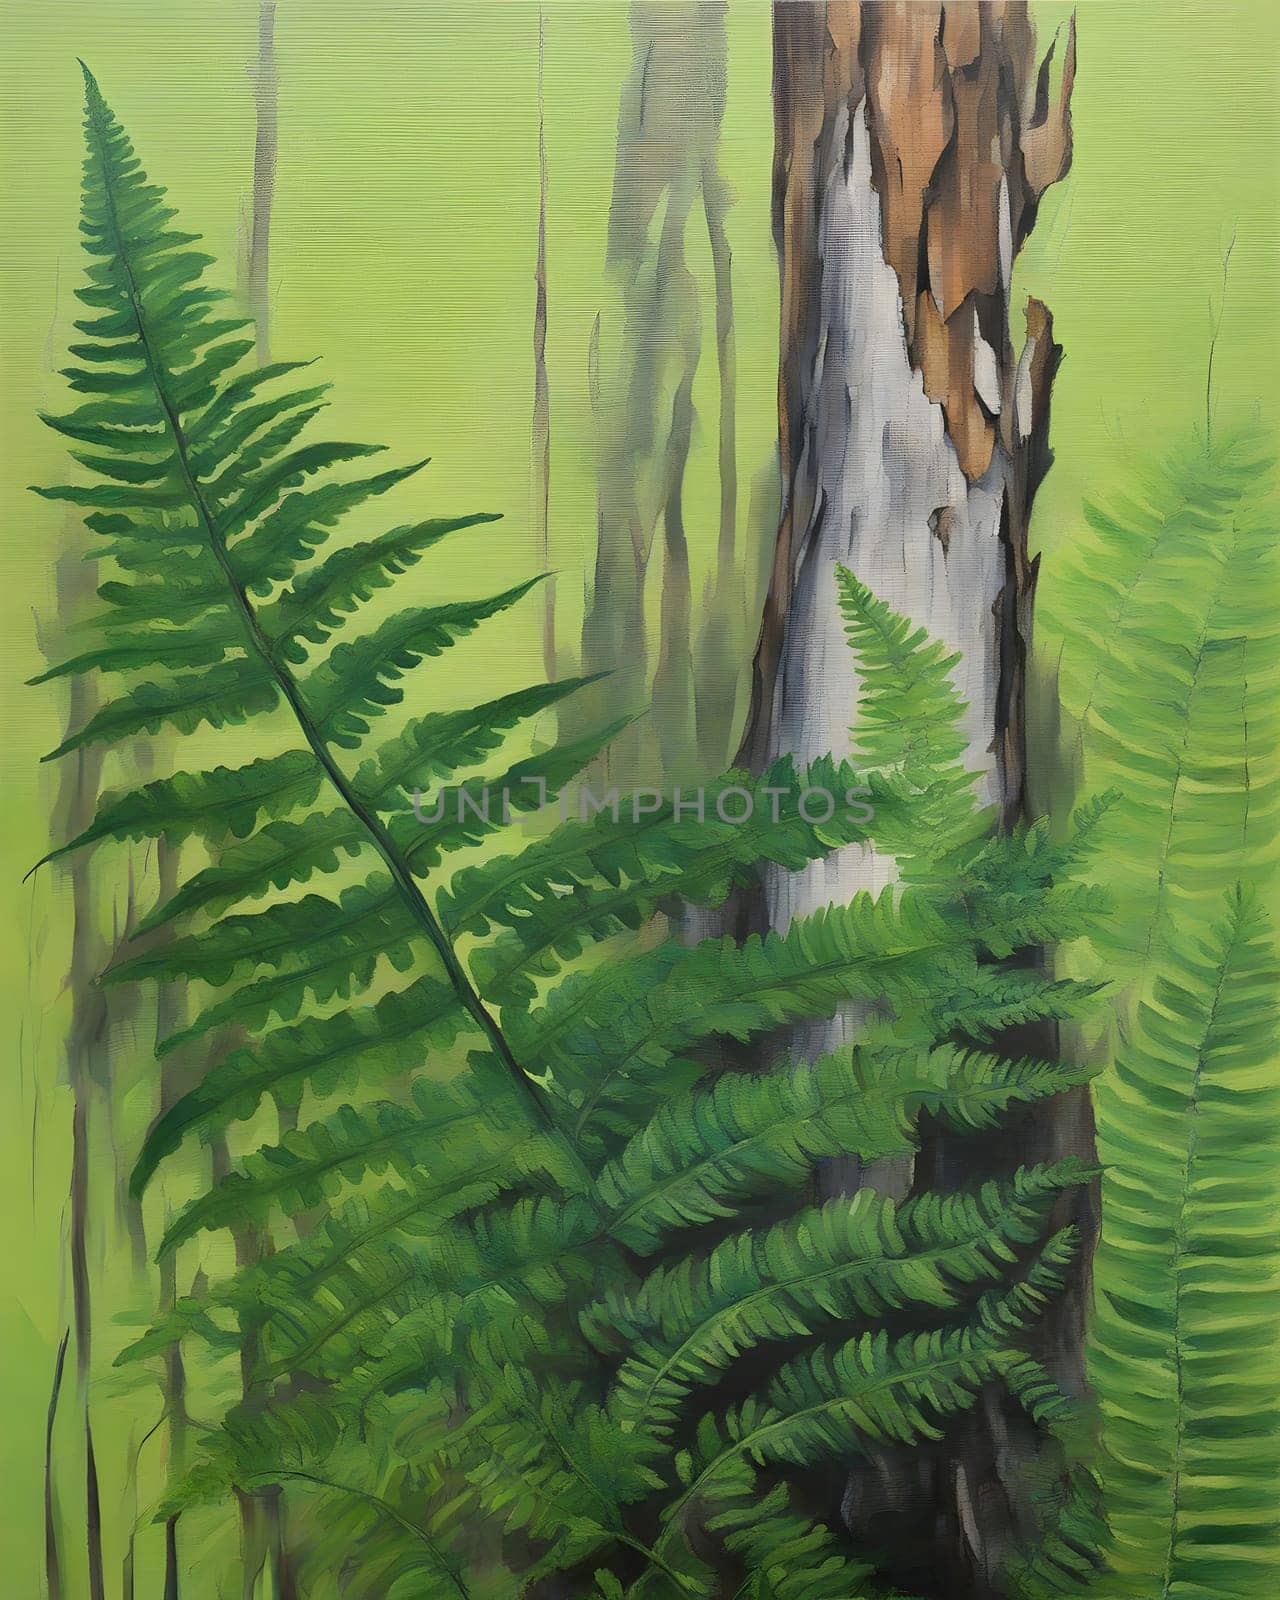 Painting acrylic on canvas Green fern, green fern leaf, dry tree trunk in the background by rostik924